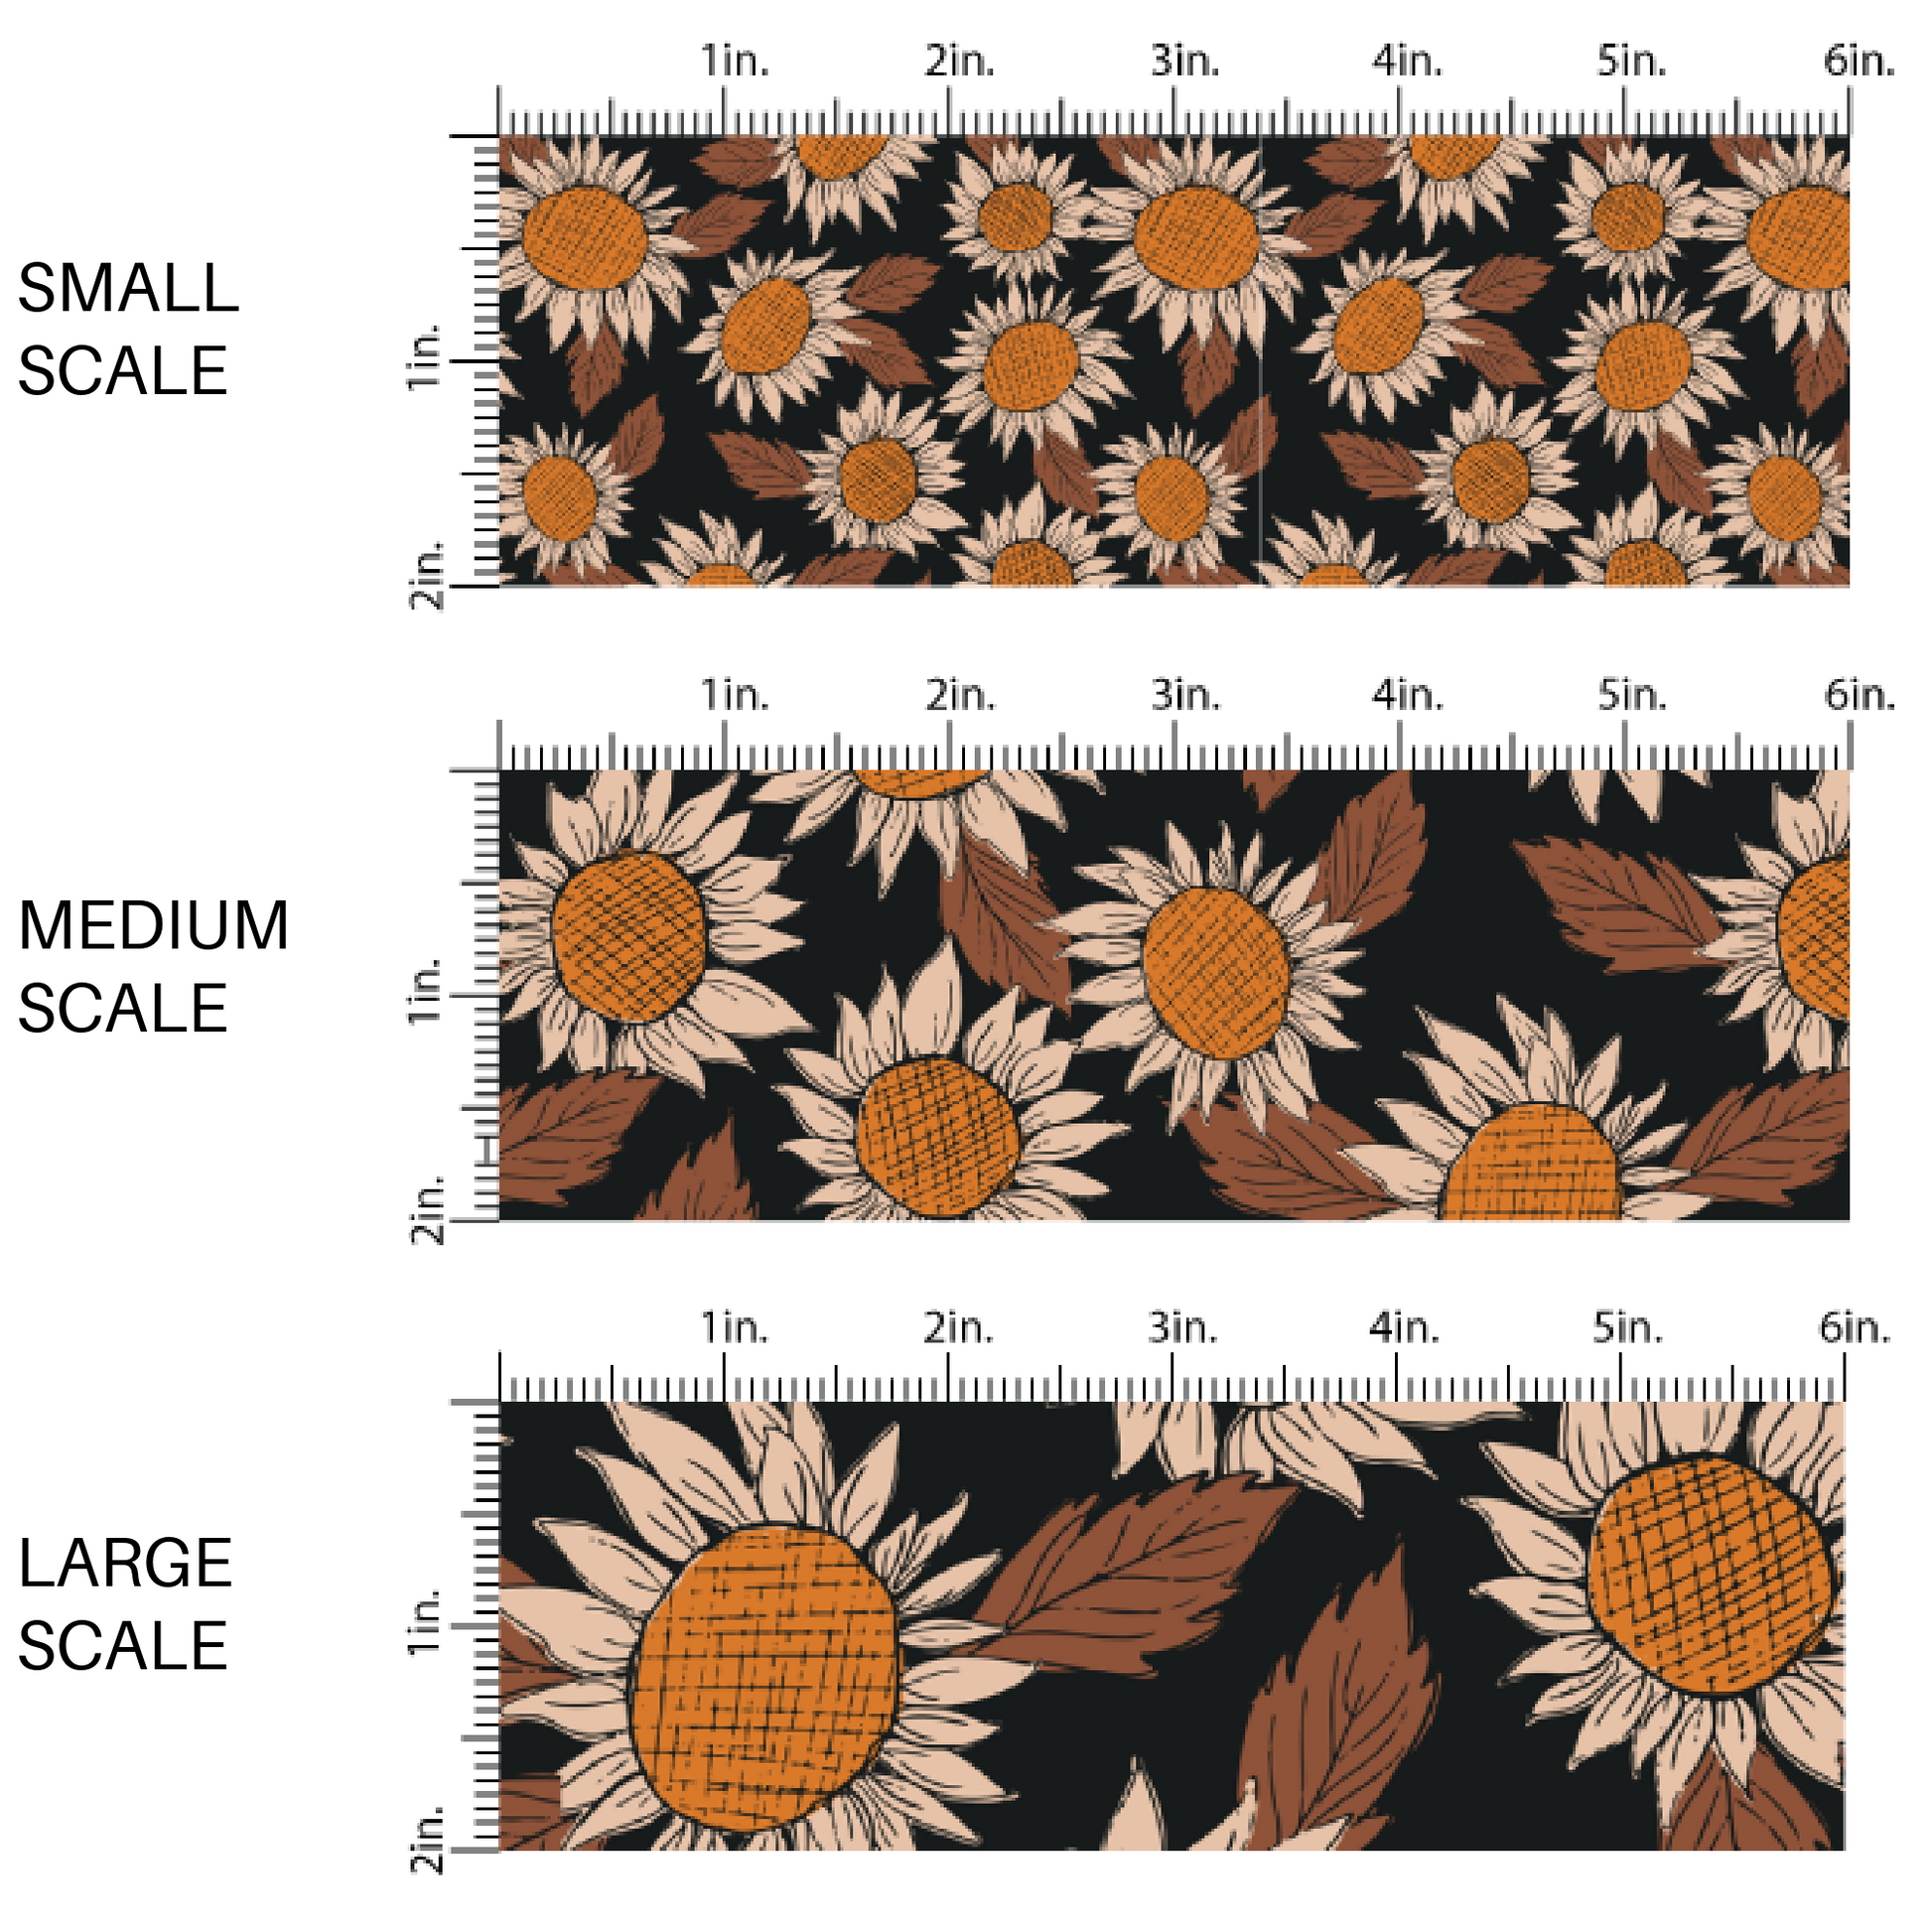 Black fabric by the yard scaled image guide with neutral colored sunflowers.